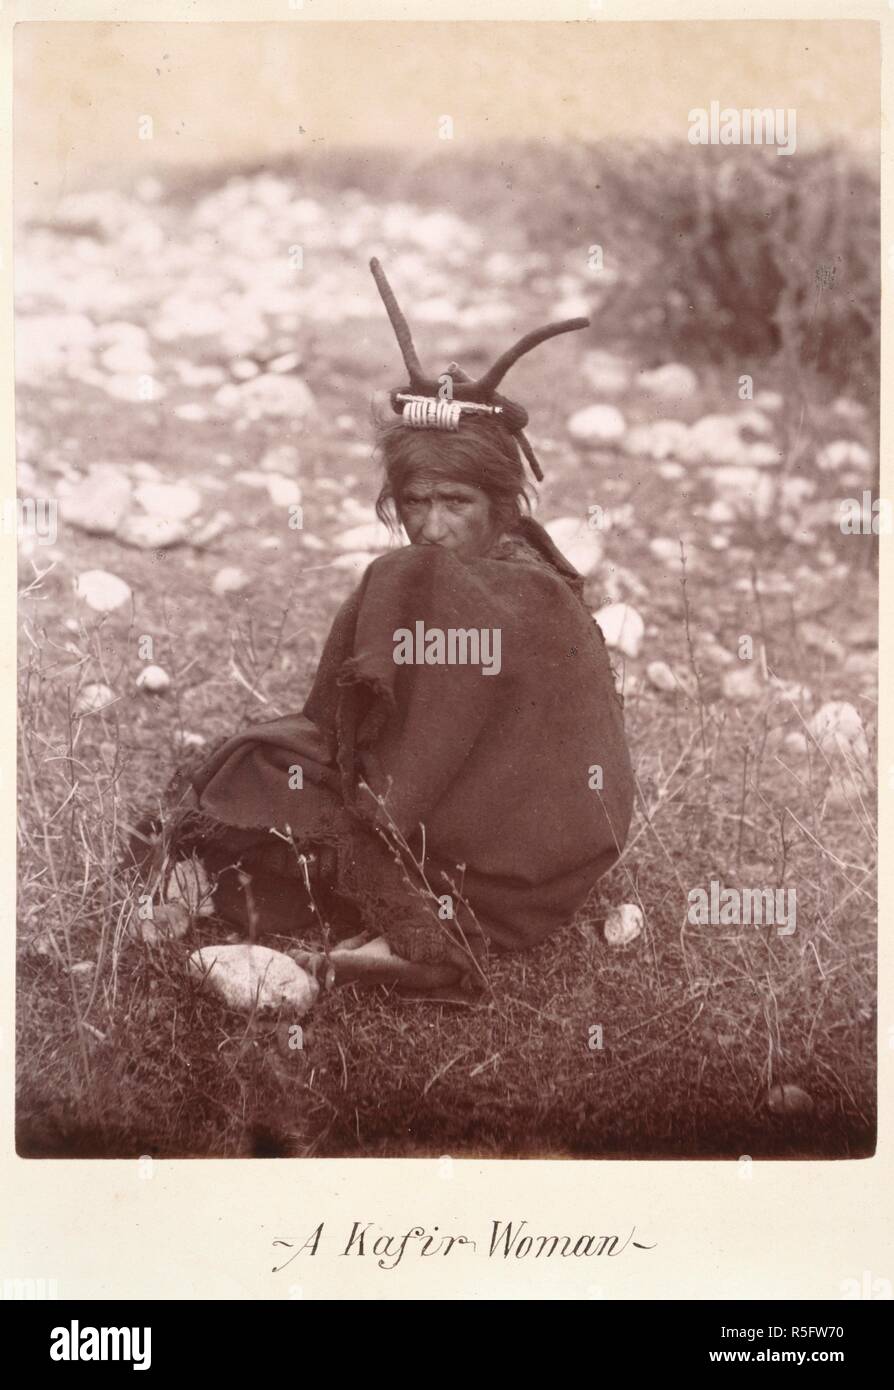 A Kafir woman. Full-length portrait of a seated woman. The photograph shows the characteristic headdress of married Bashgal women: 'Here, for the first time, Bashgal women were seen in their own country by any European, and the novel experience was not pleasing. They had hard, forbidding faces, and were very dirty. Their only dress was a long goat's-hair gown, reaching from the neck to below the knee, and they, like the men, wore ankle boots of soft brown leather. The married women wore a head-dress, but only out of doors. Their head-dress is peculiar to the Bashgal Kafirs. It consists of a ca Stock Photo